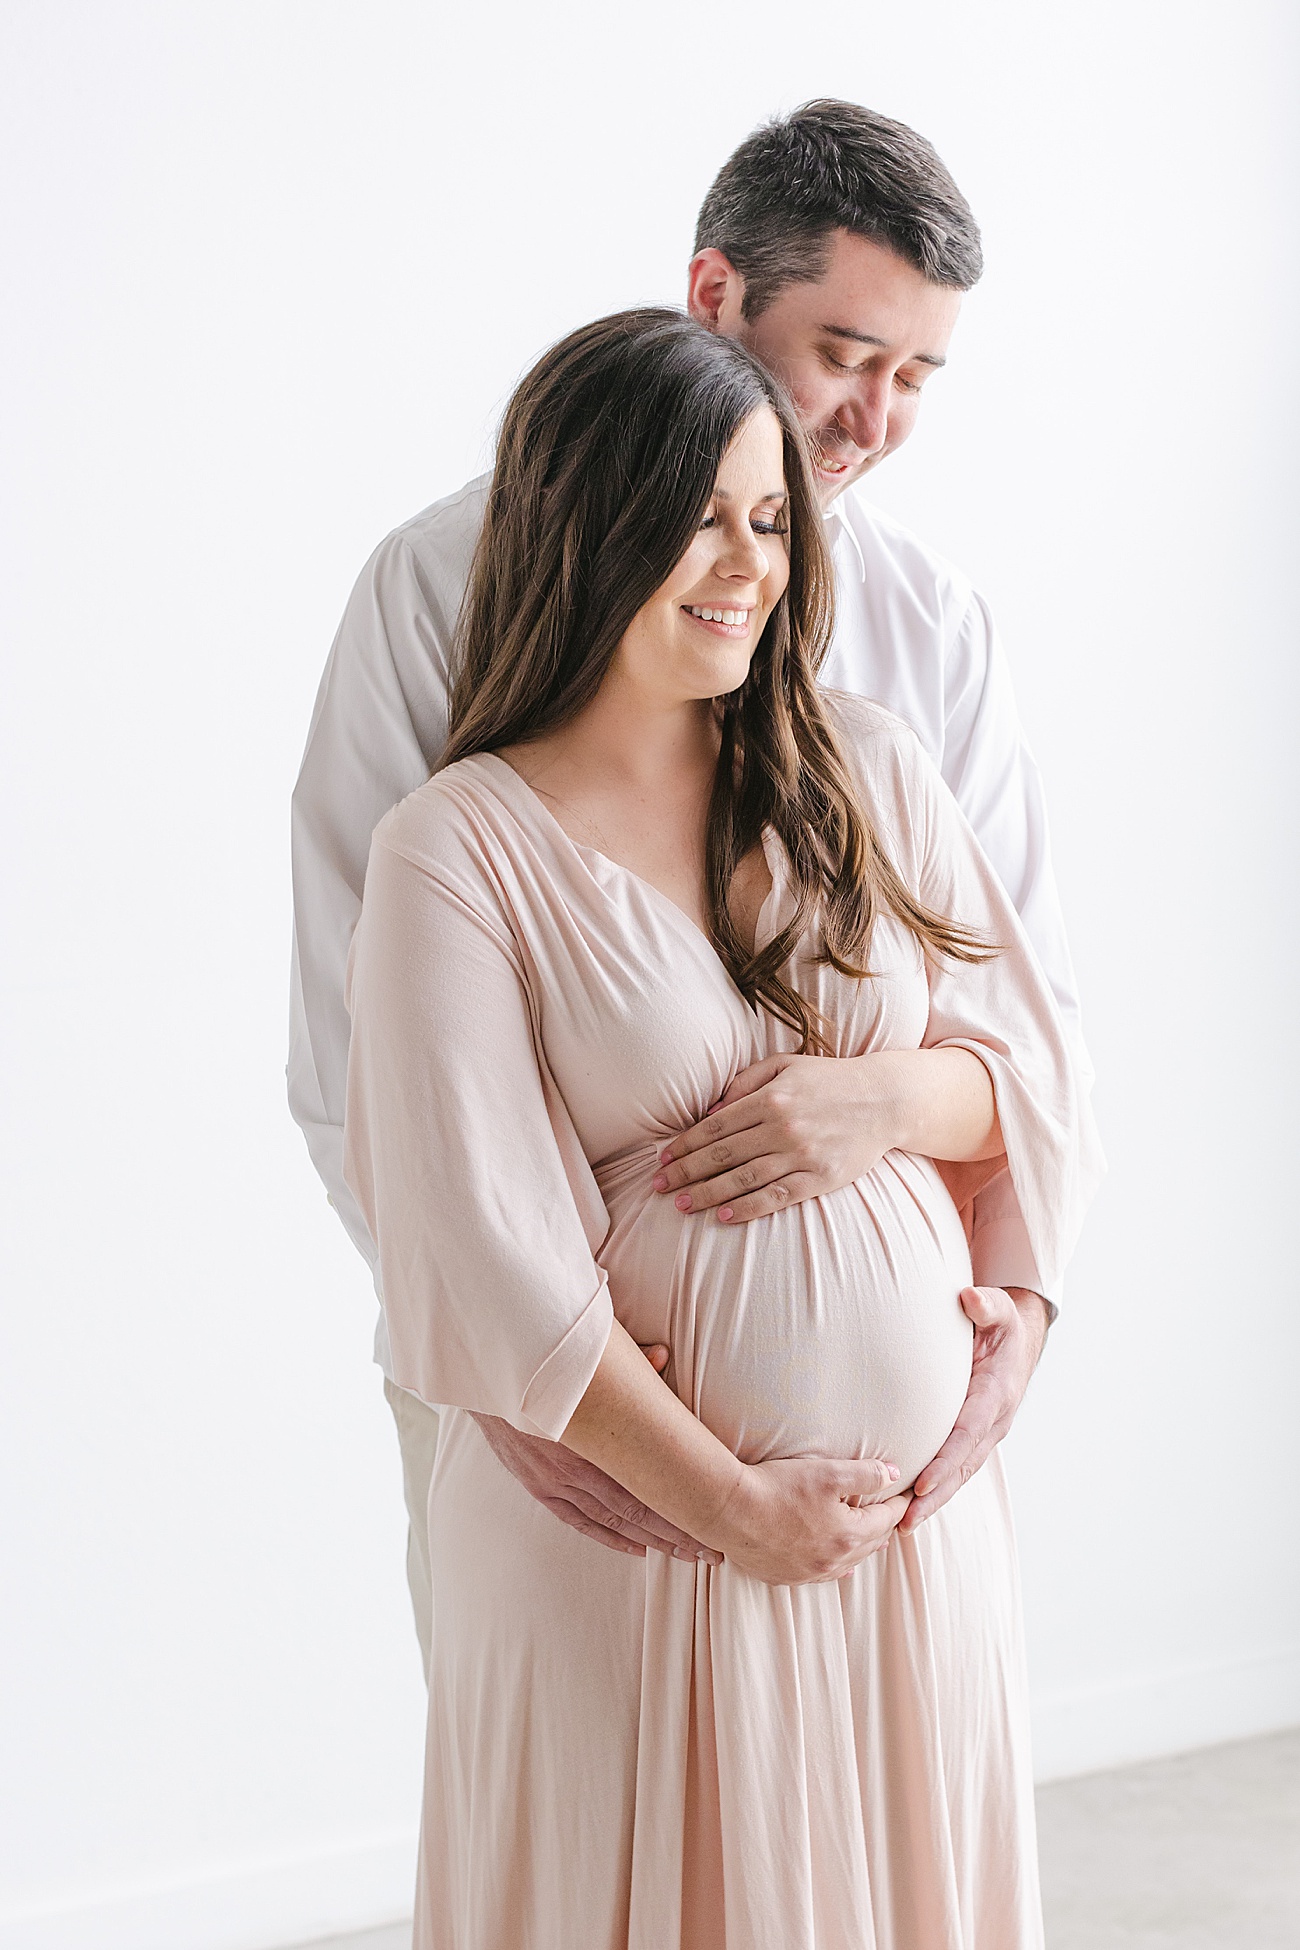 Sweet expecting parents embracing baby bump in photo by Austin maternity photographer, Sana Ahmed Photography.